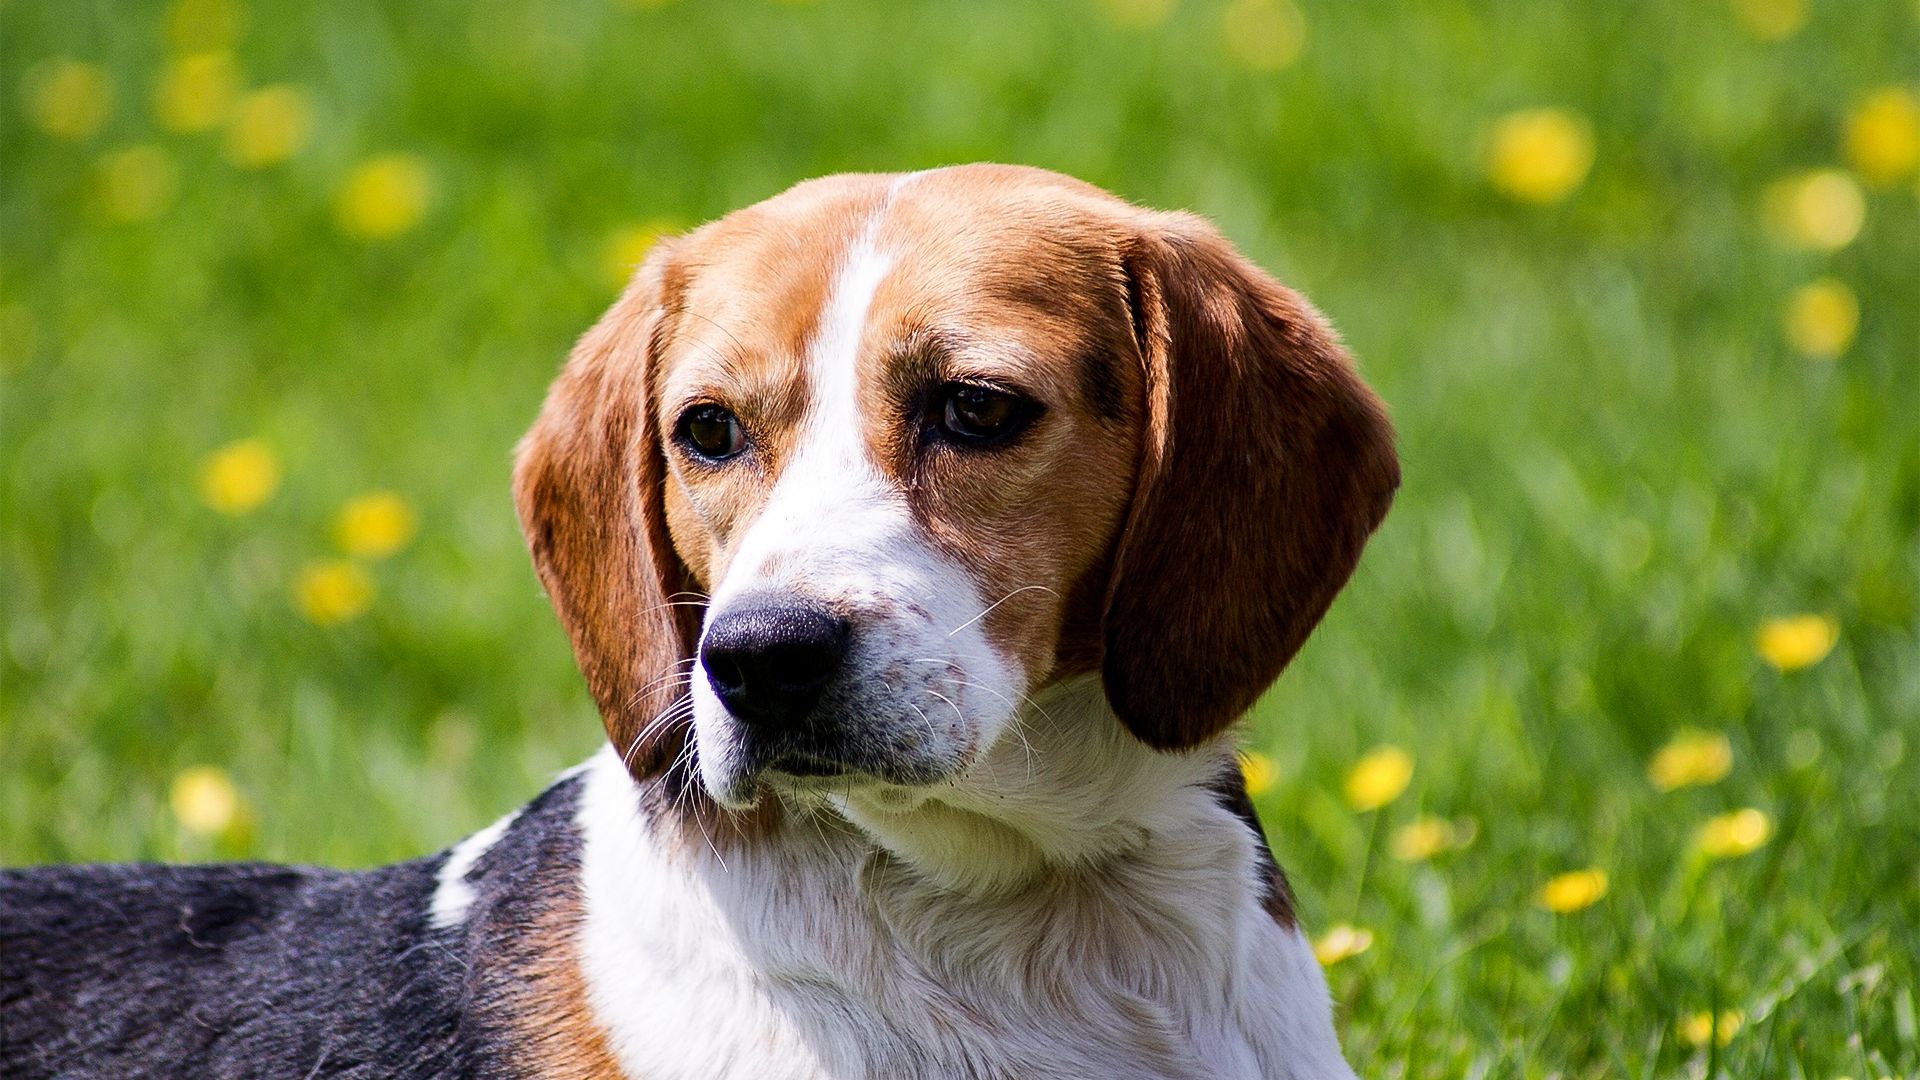 Desktop Wallpaper Beagle, Dog, Relaxed, Animal, Muzzle, Hd Image, Picture,  Background, 74dc10